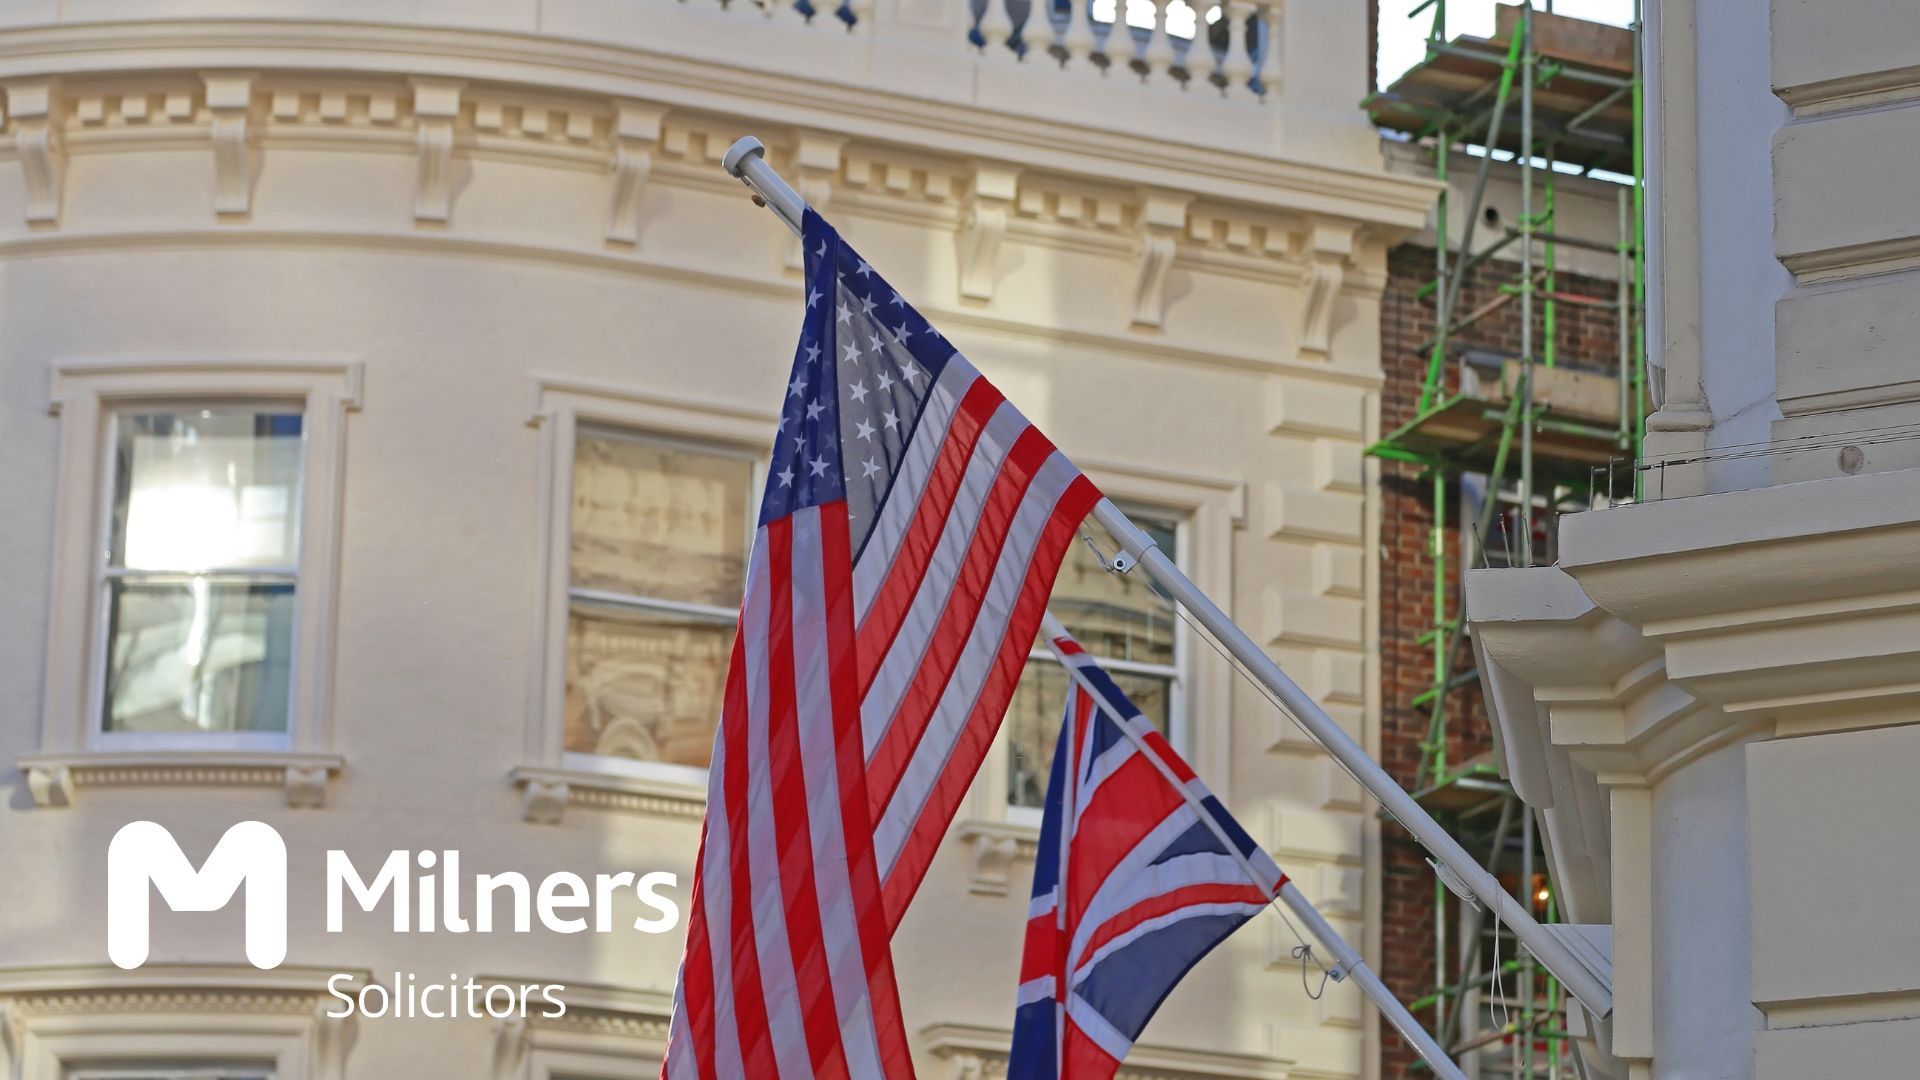 Britain and the USA have a lot in common – so you may be surprised to learn that their laws can be quite different. Join us as we look at 5 key differences.